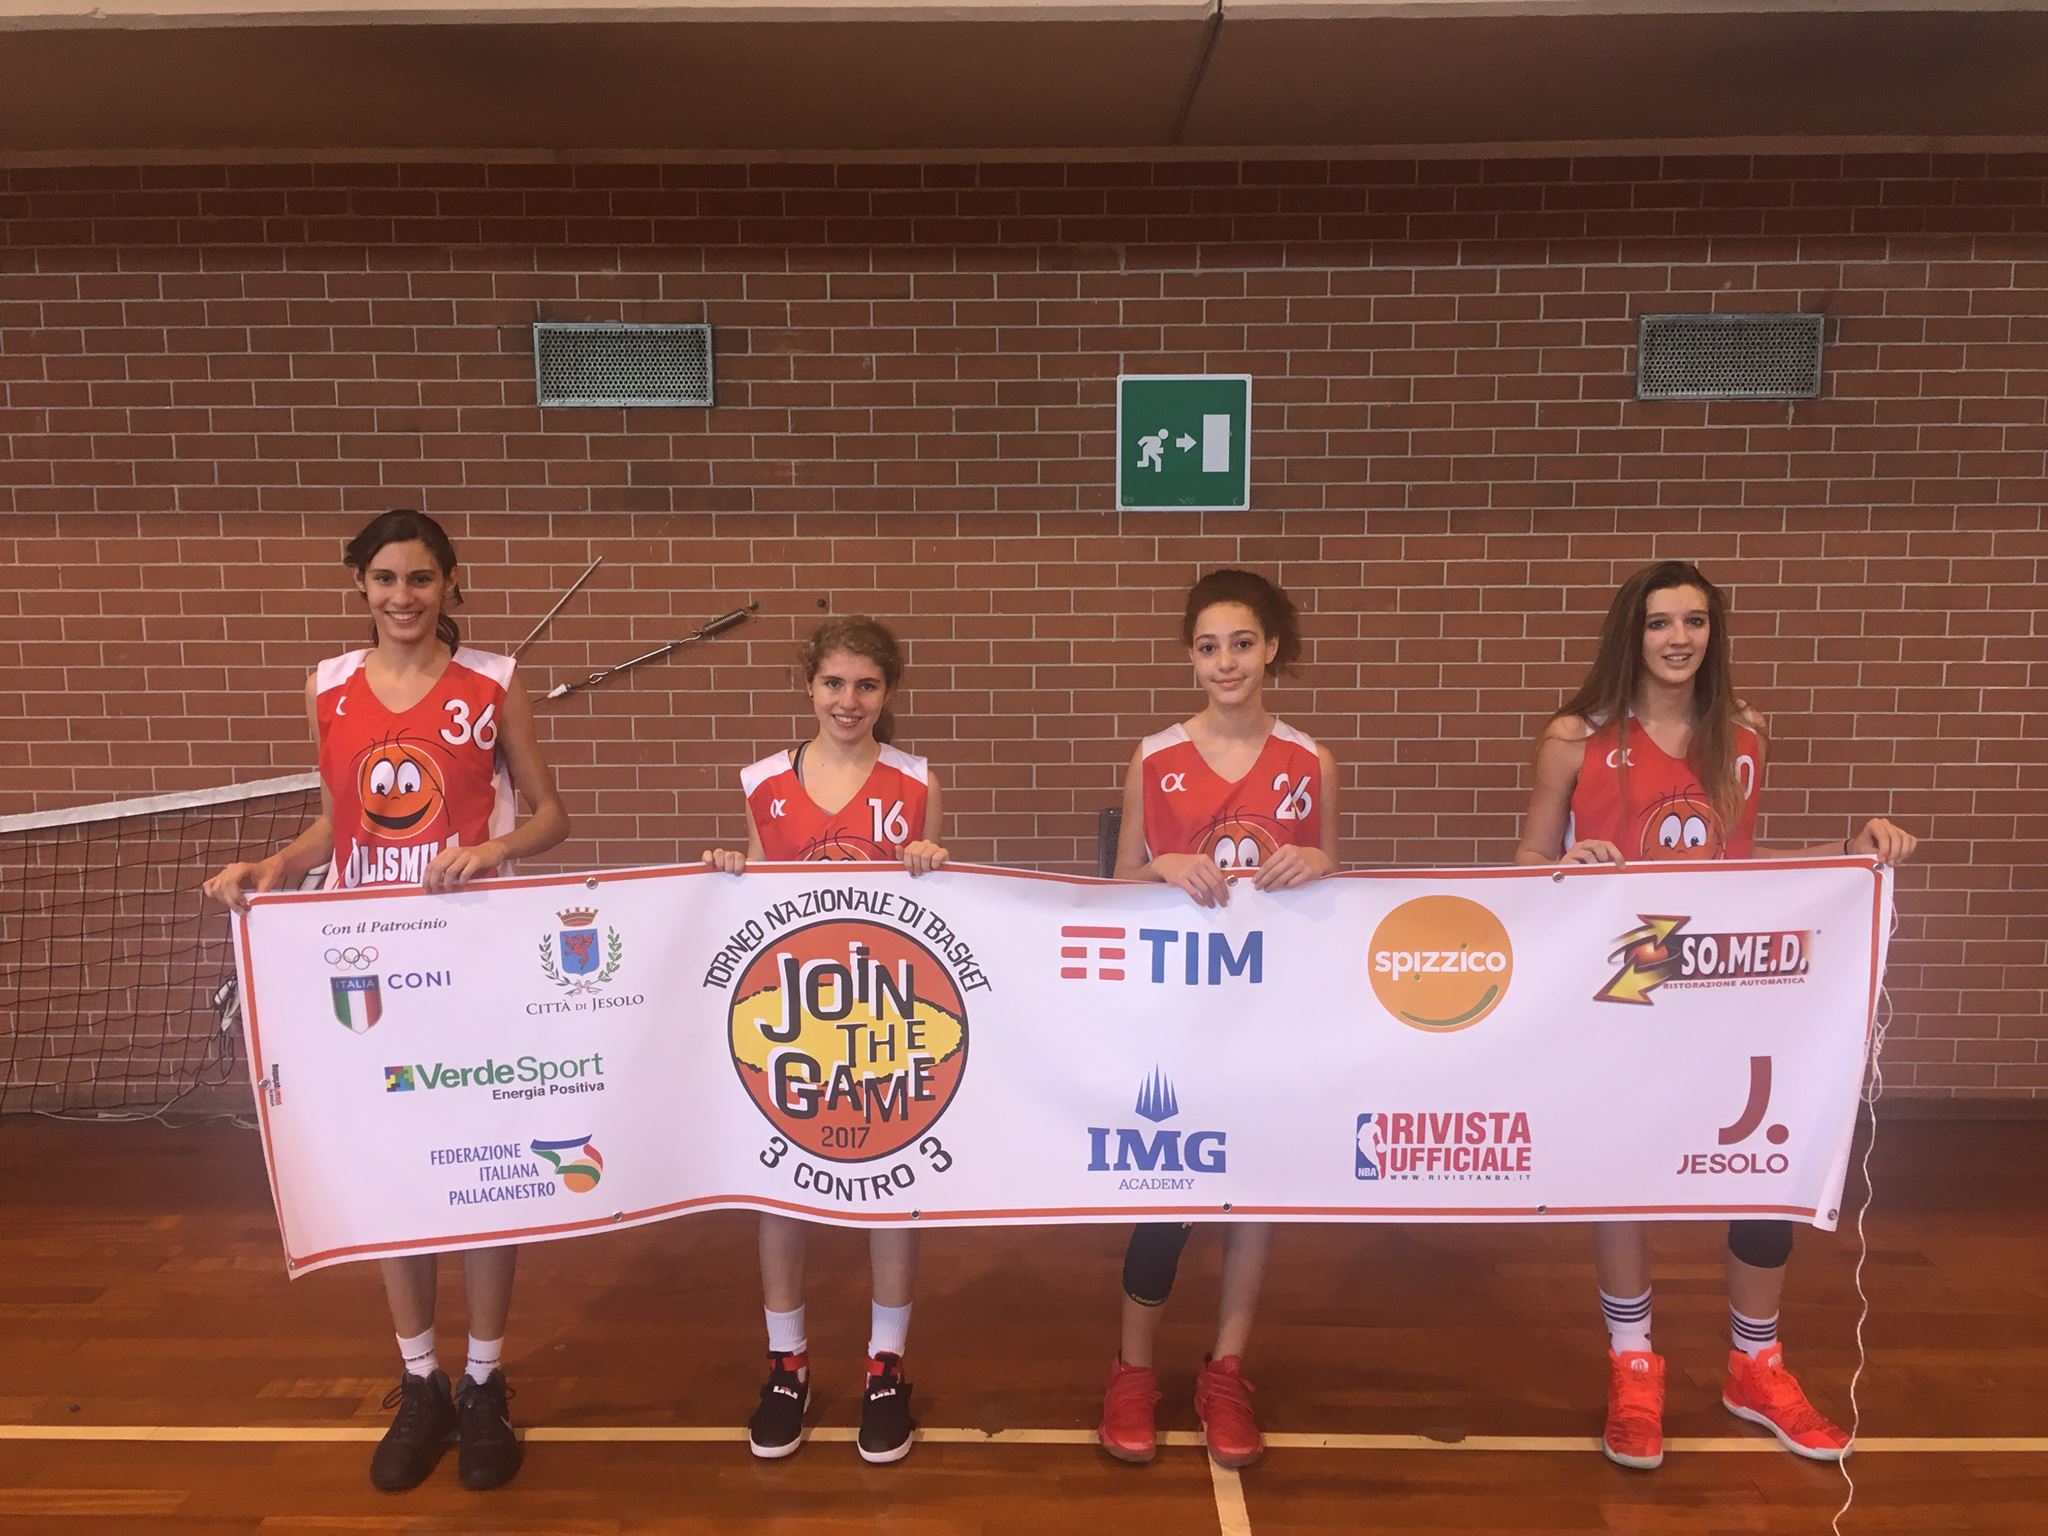 Join the Game: Polismile campione regionale!